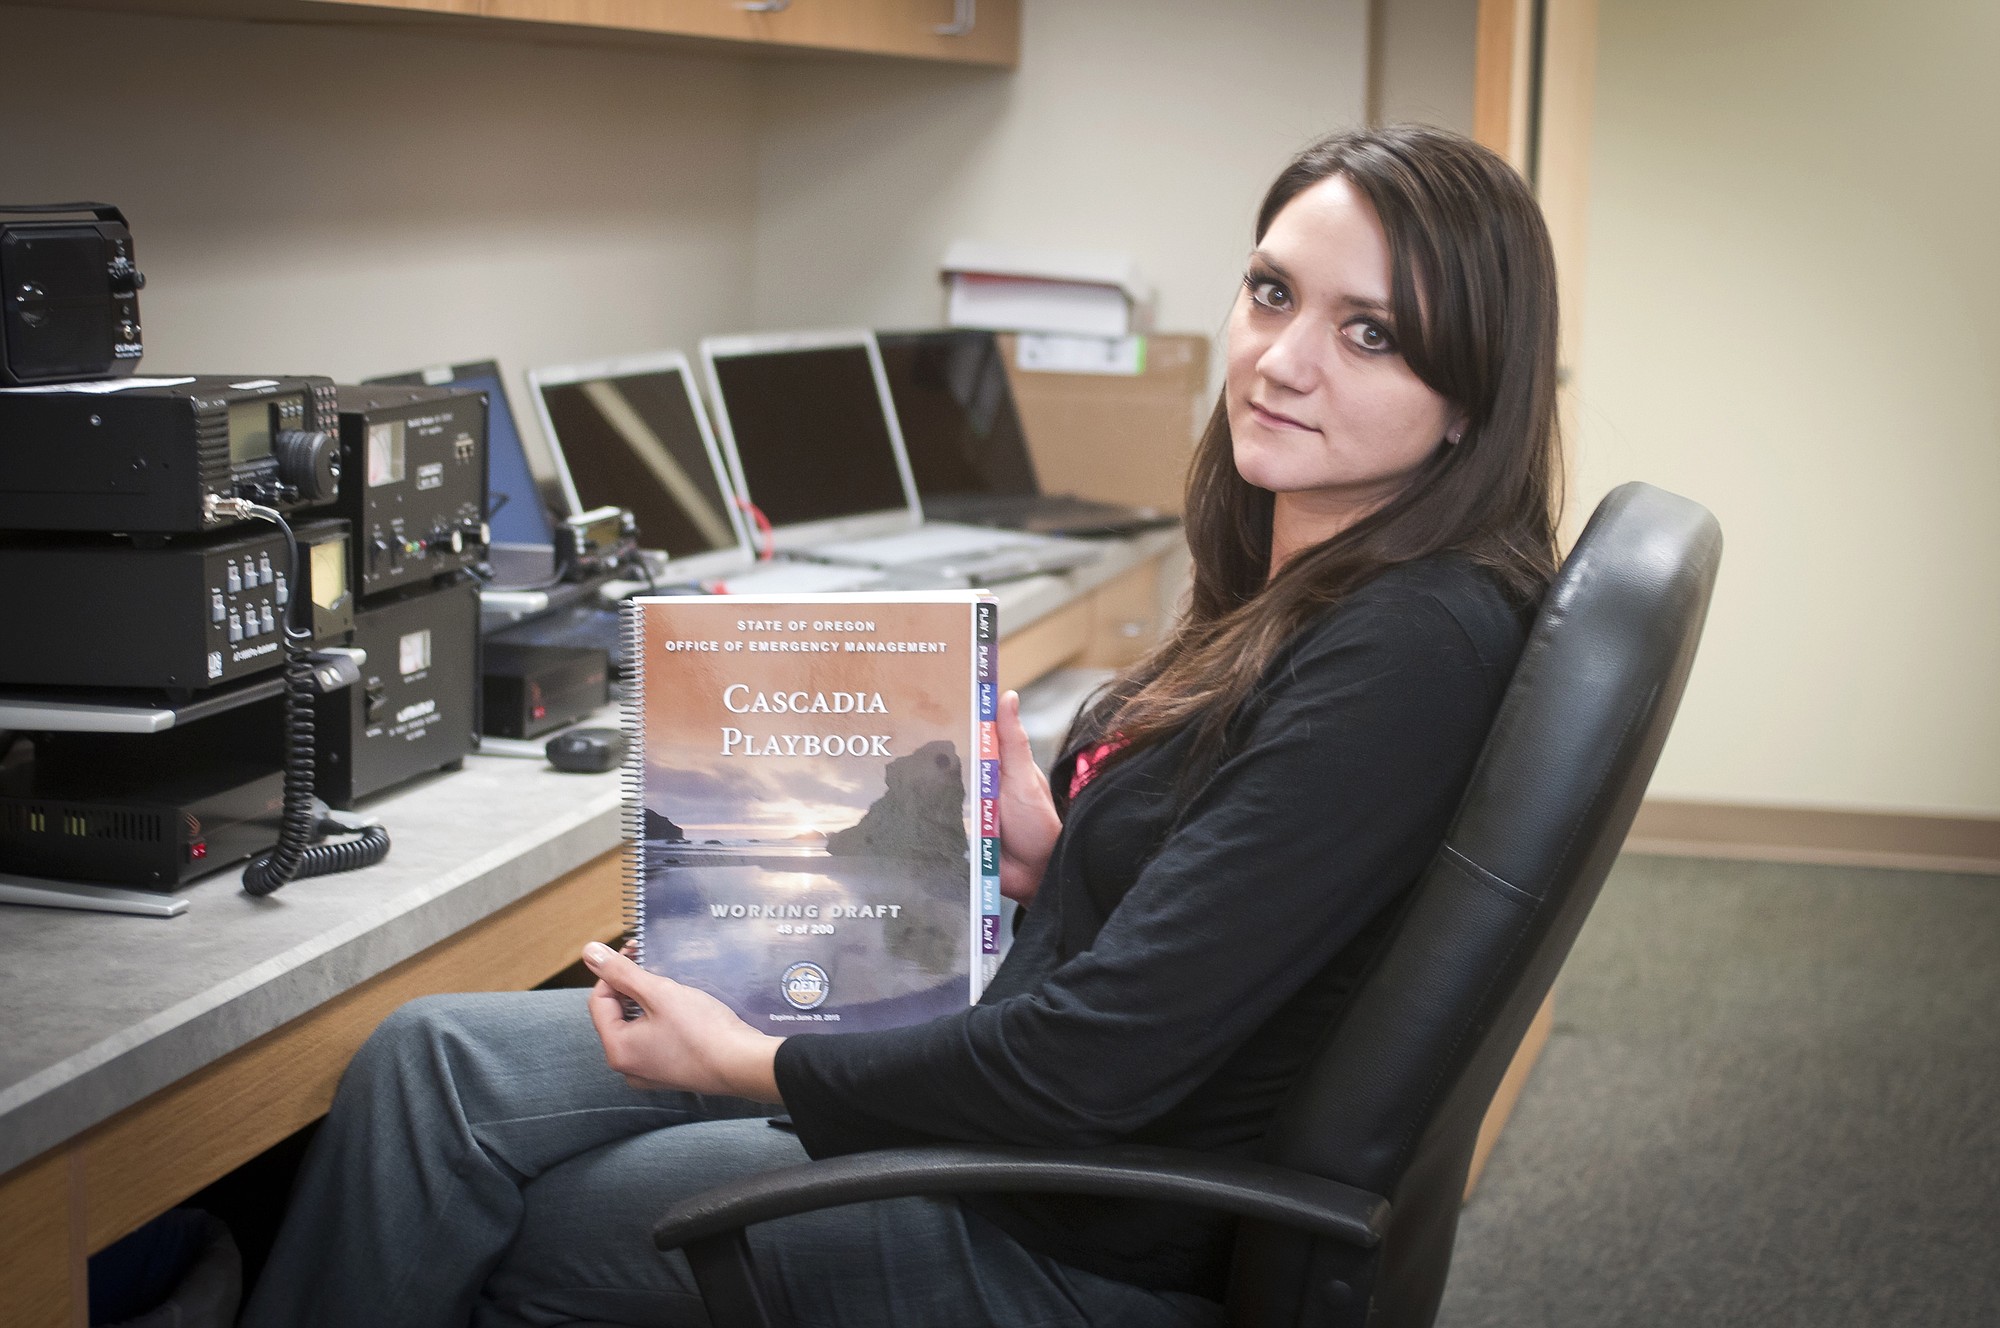 Kristy Bachamp, Wasco County Sheriff's Department emergency manager, holds a draft of the Cascadia Playbook developed by the Oregon Office of Emergency Management to plan emergency earthquake response.